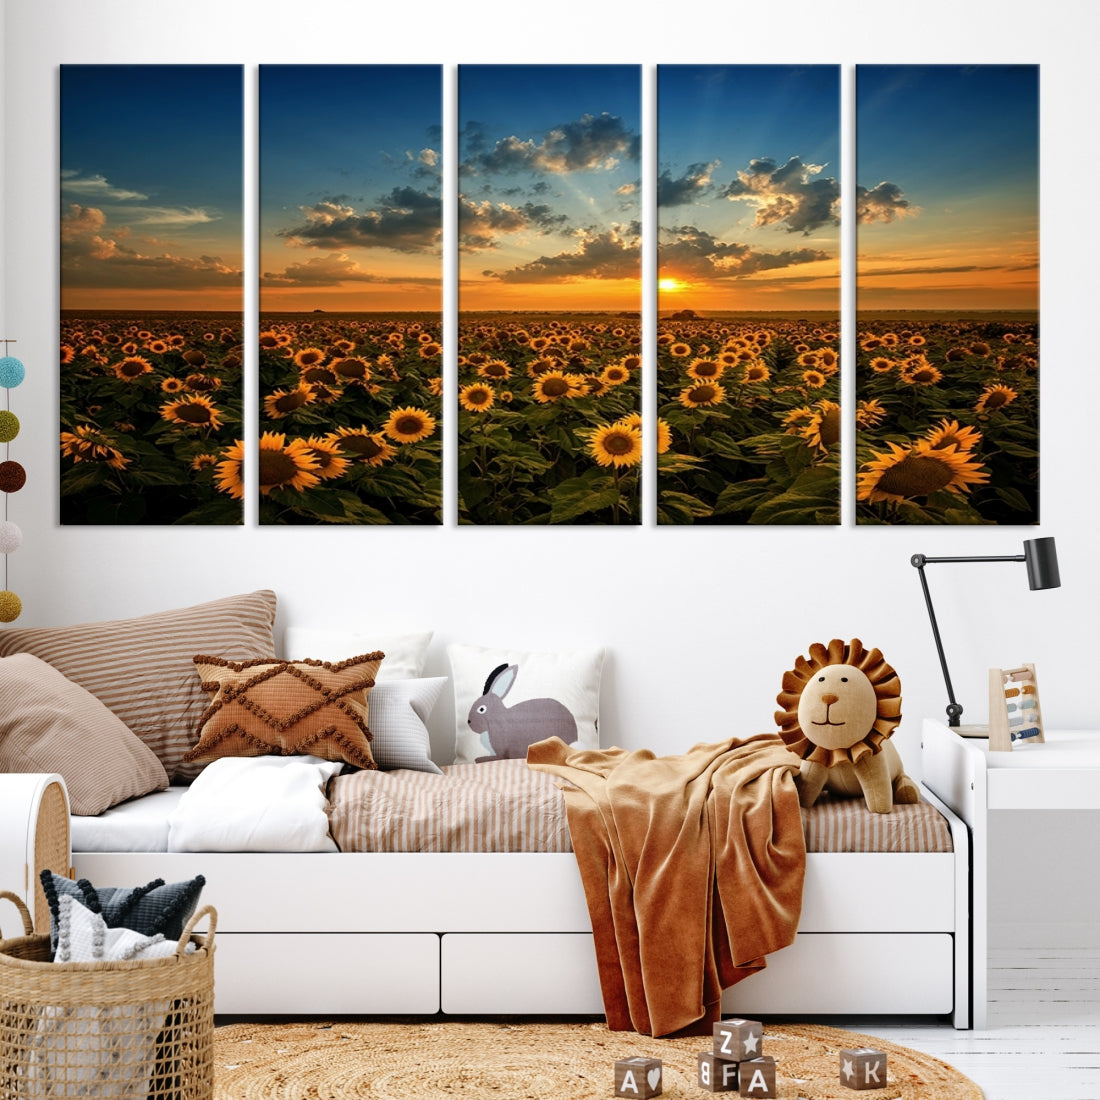 Sunflower Field Sunset Large Wall Art Canvas Print for Living Room Dining Room Home Office Wall Decor Artwork